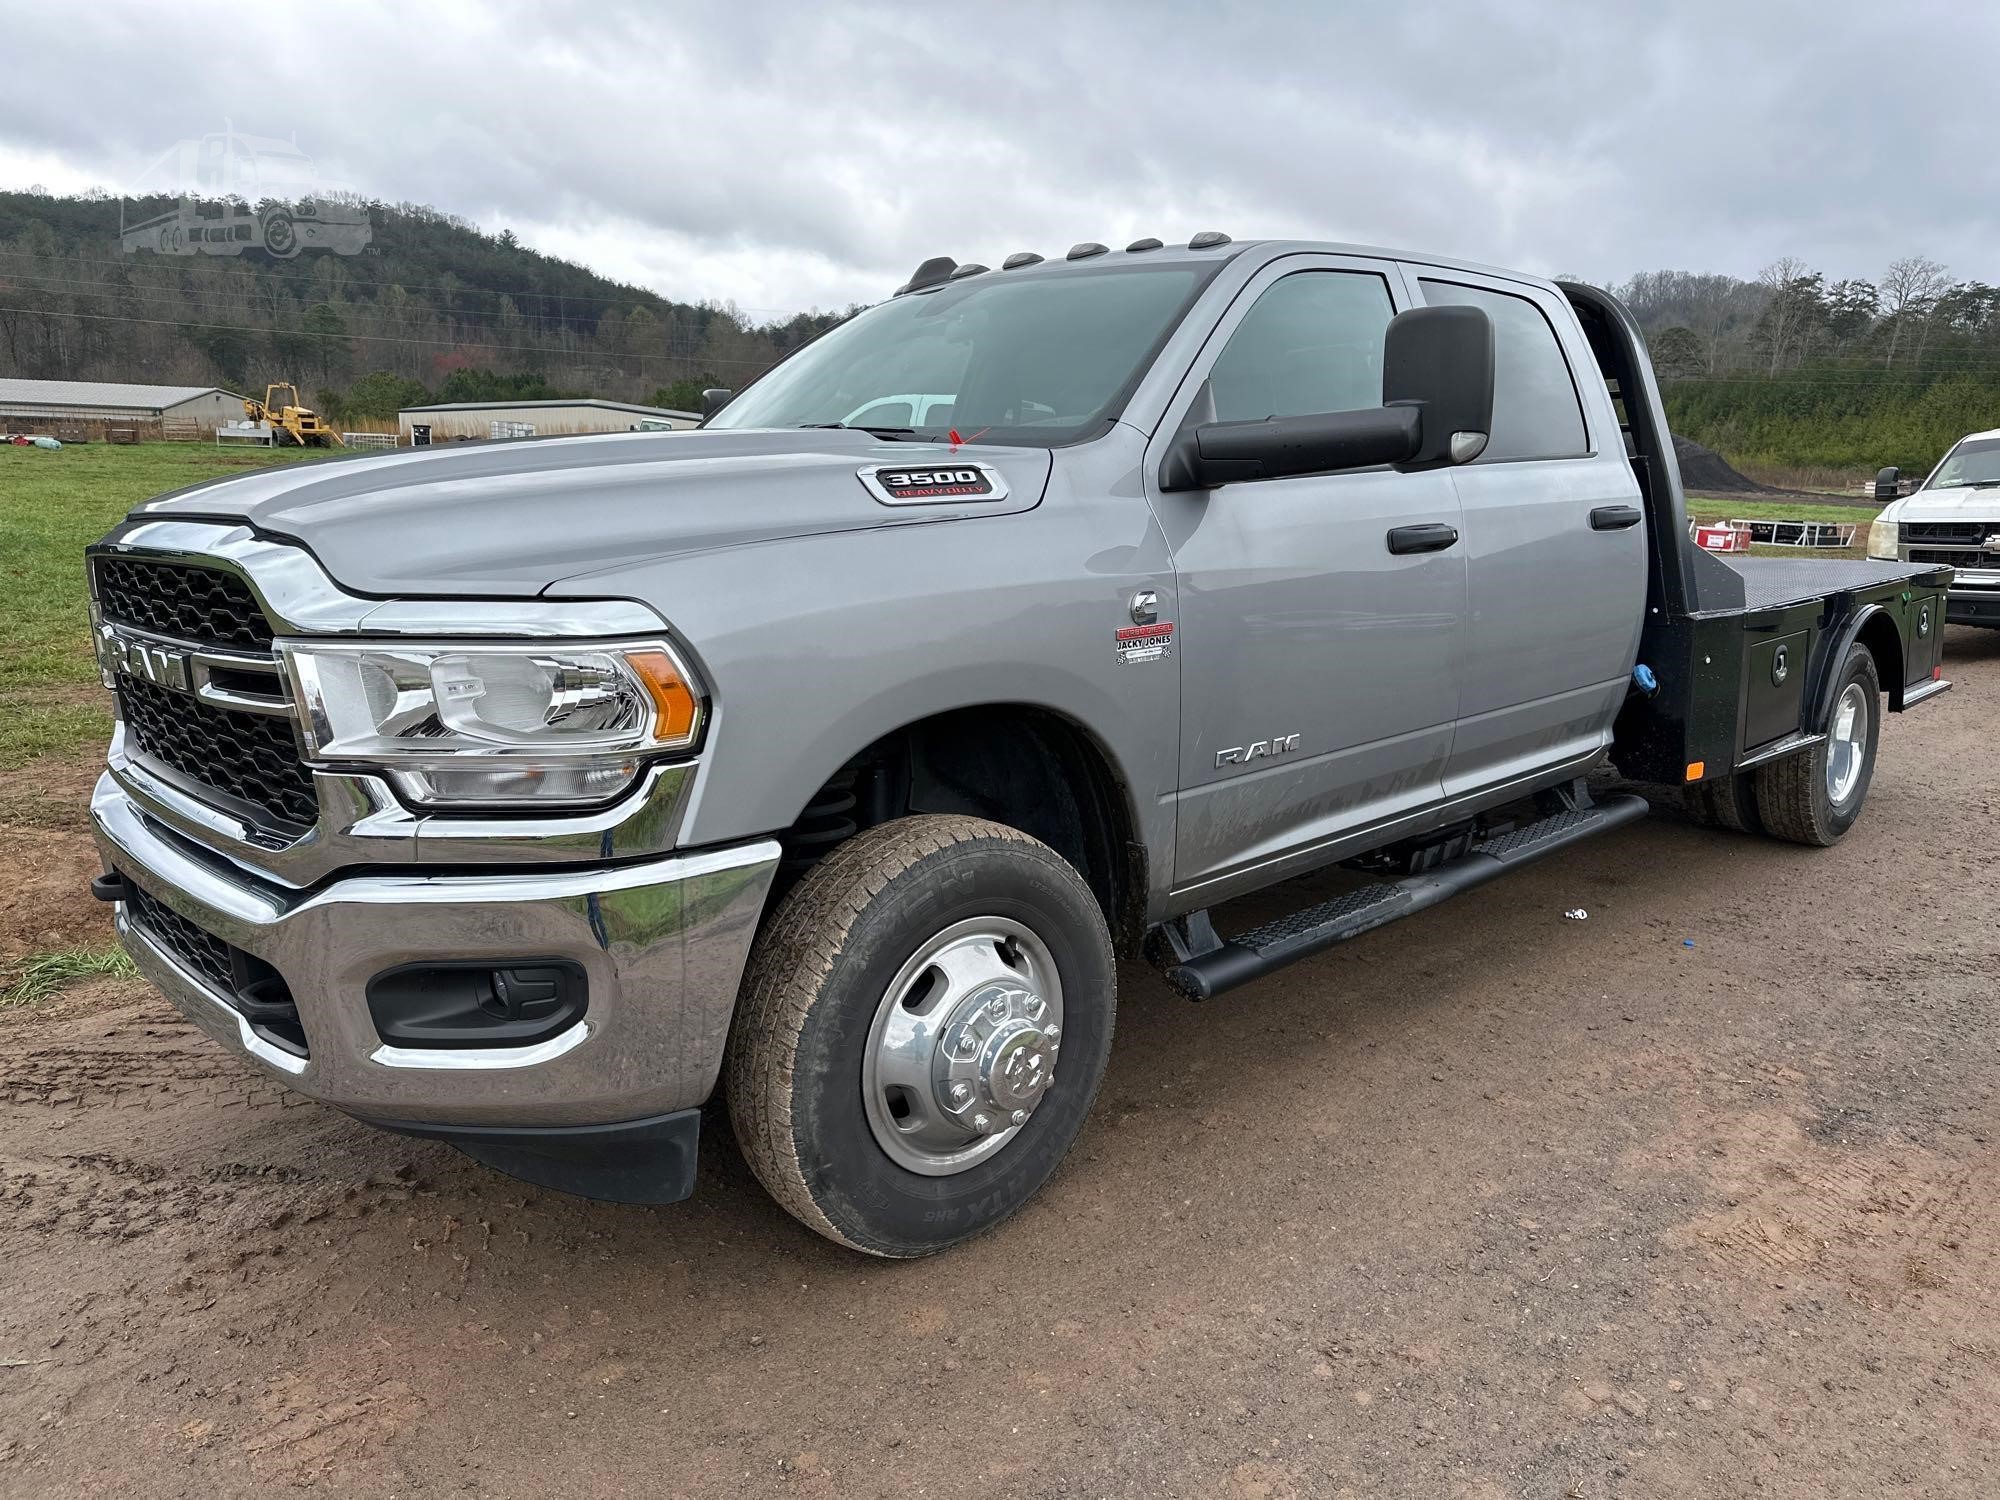 Ram 3500 Flatbed Trucks Auction Results In Georgia - 22 Listings | TruckPaper.com - Page 1 of 1